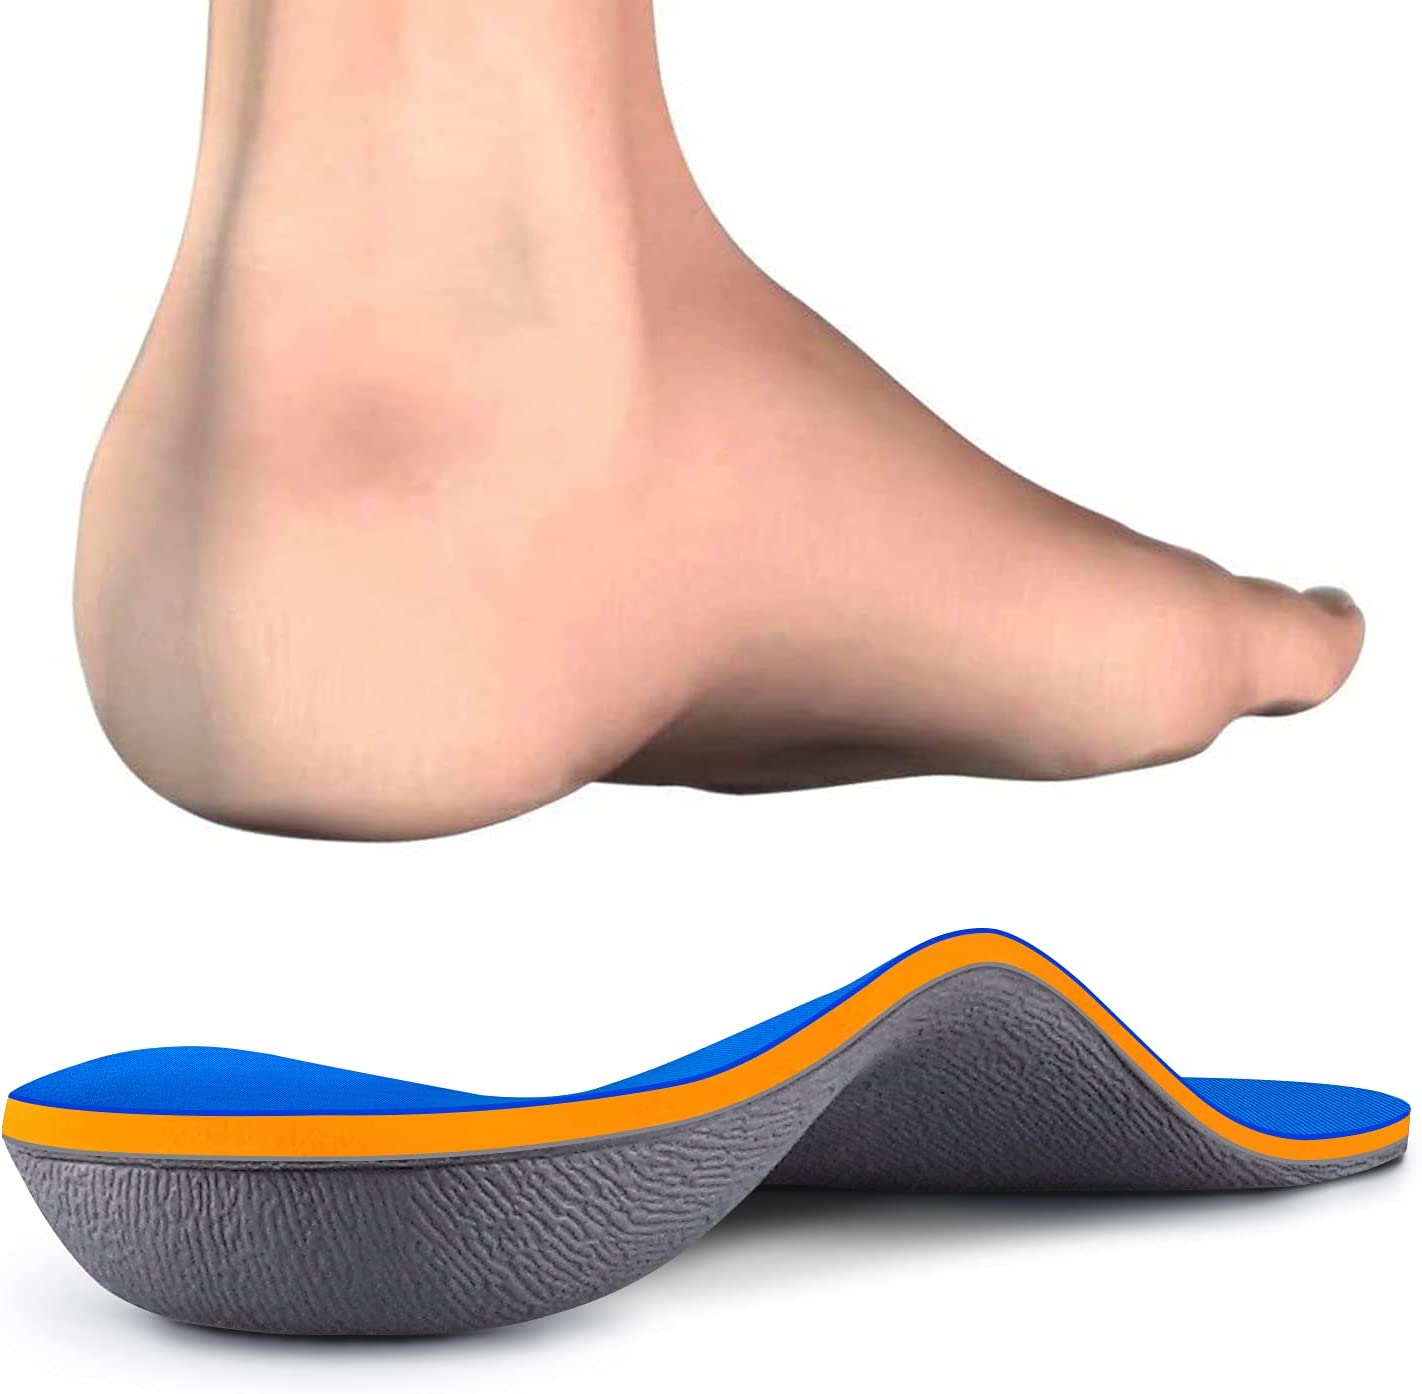 Review of Kelaide Arch Support Insoles for Plantar Fasciitis